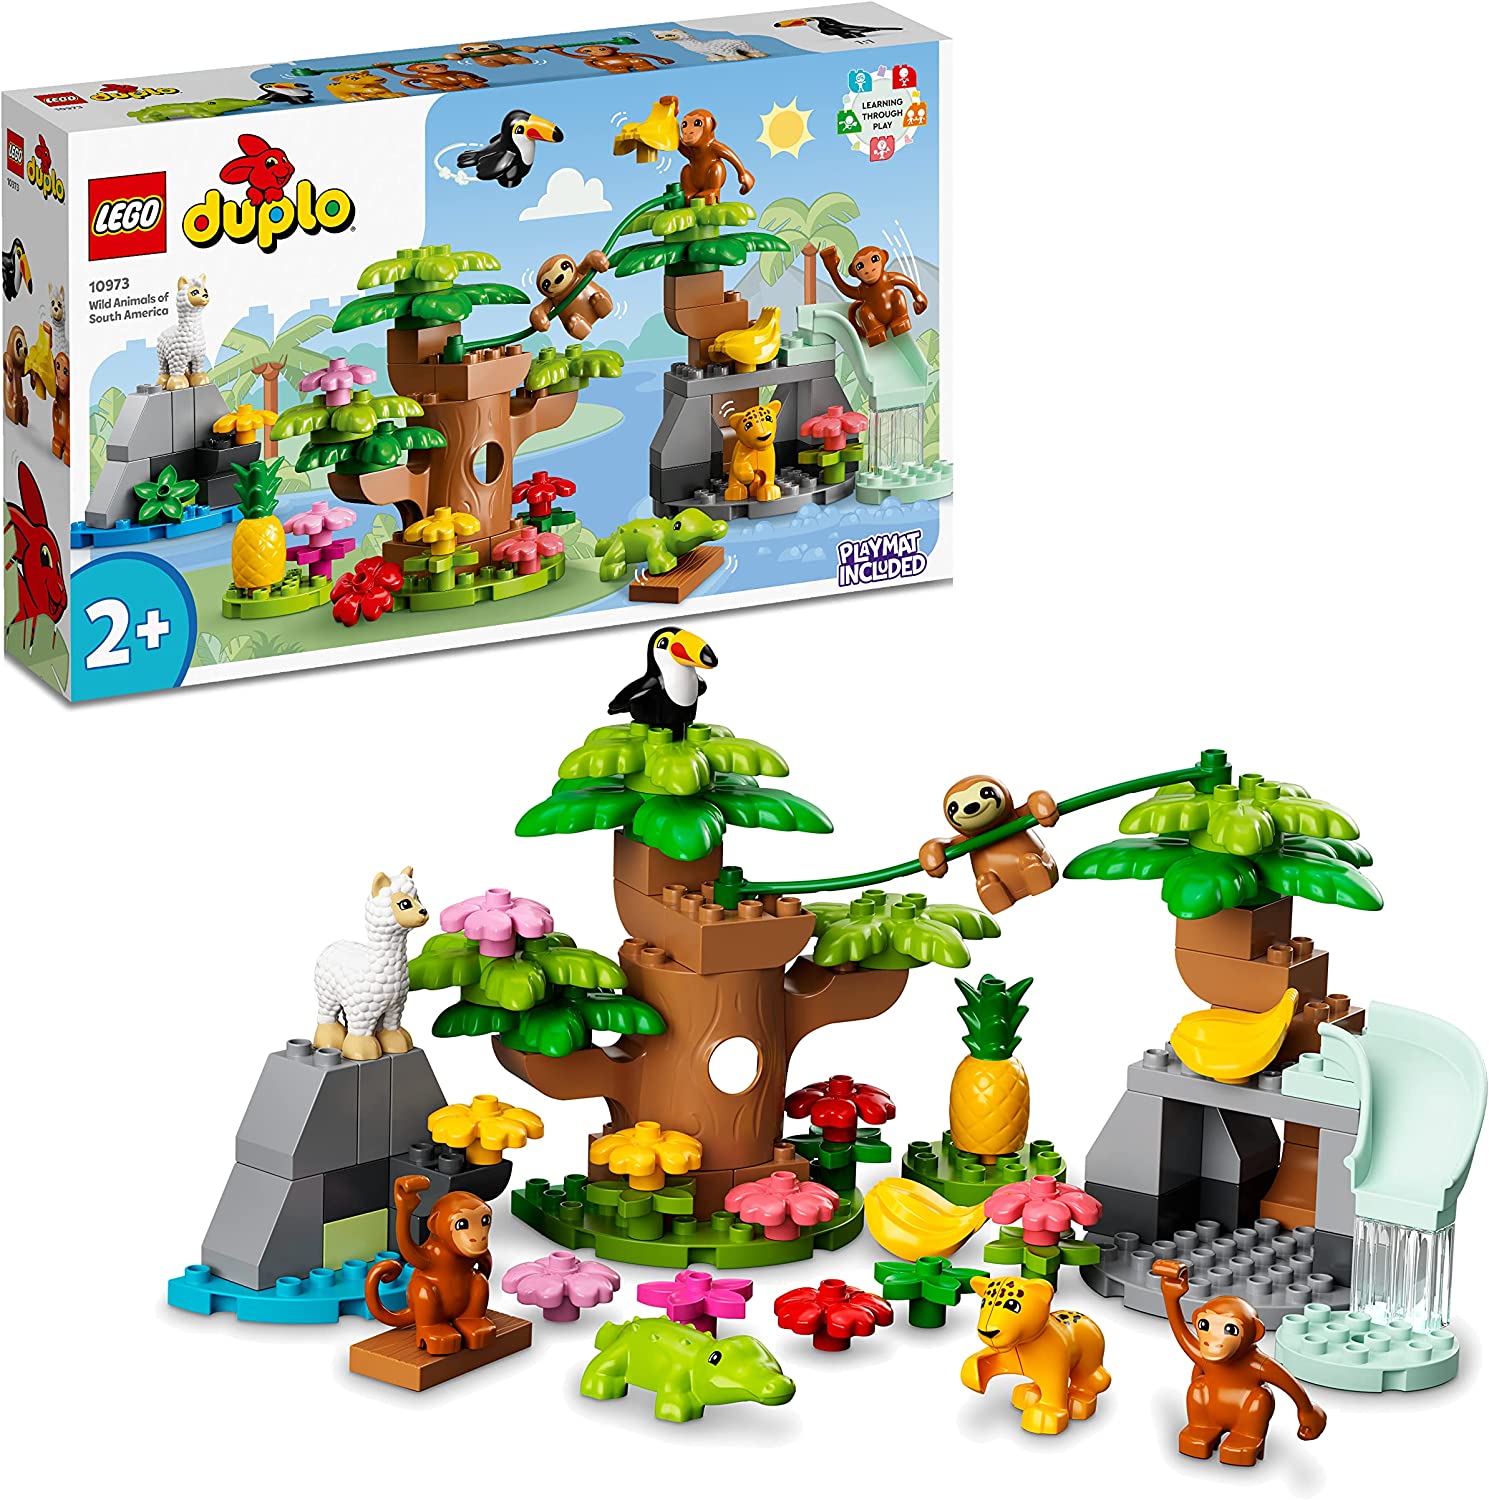 LEGO 10973 DUPLO Wild Animals South America Toy Set with 7 Animal Figures, Stones and Jungle Play Mat, Educational Toy from 2 Years